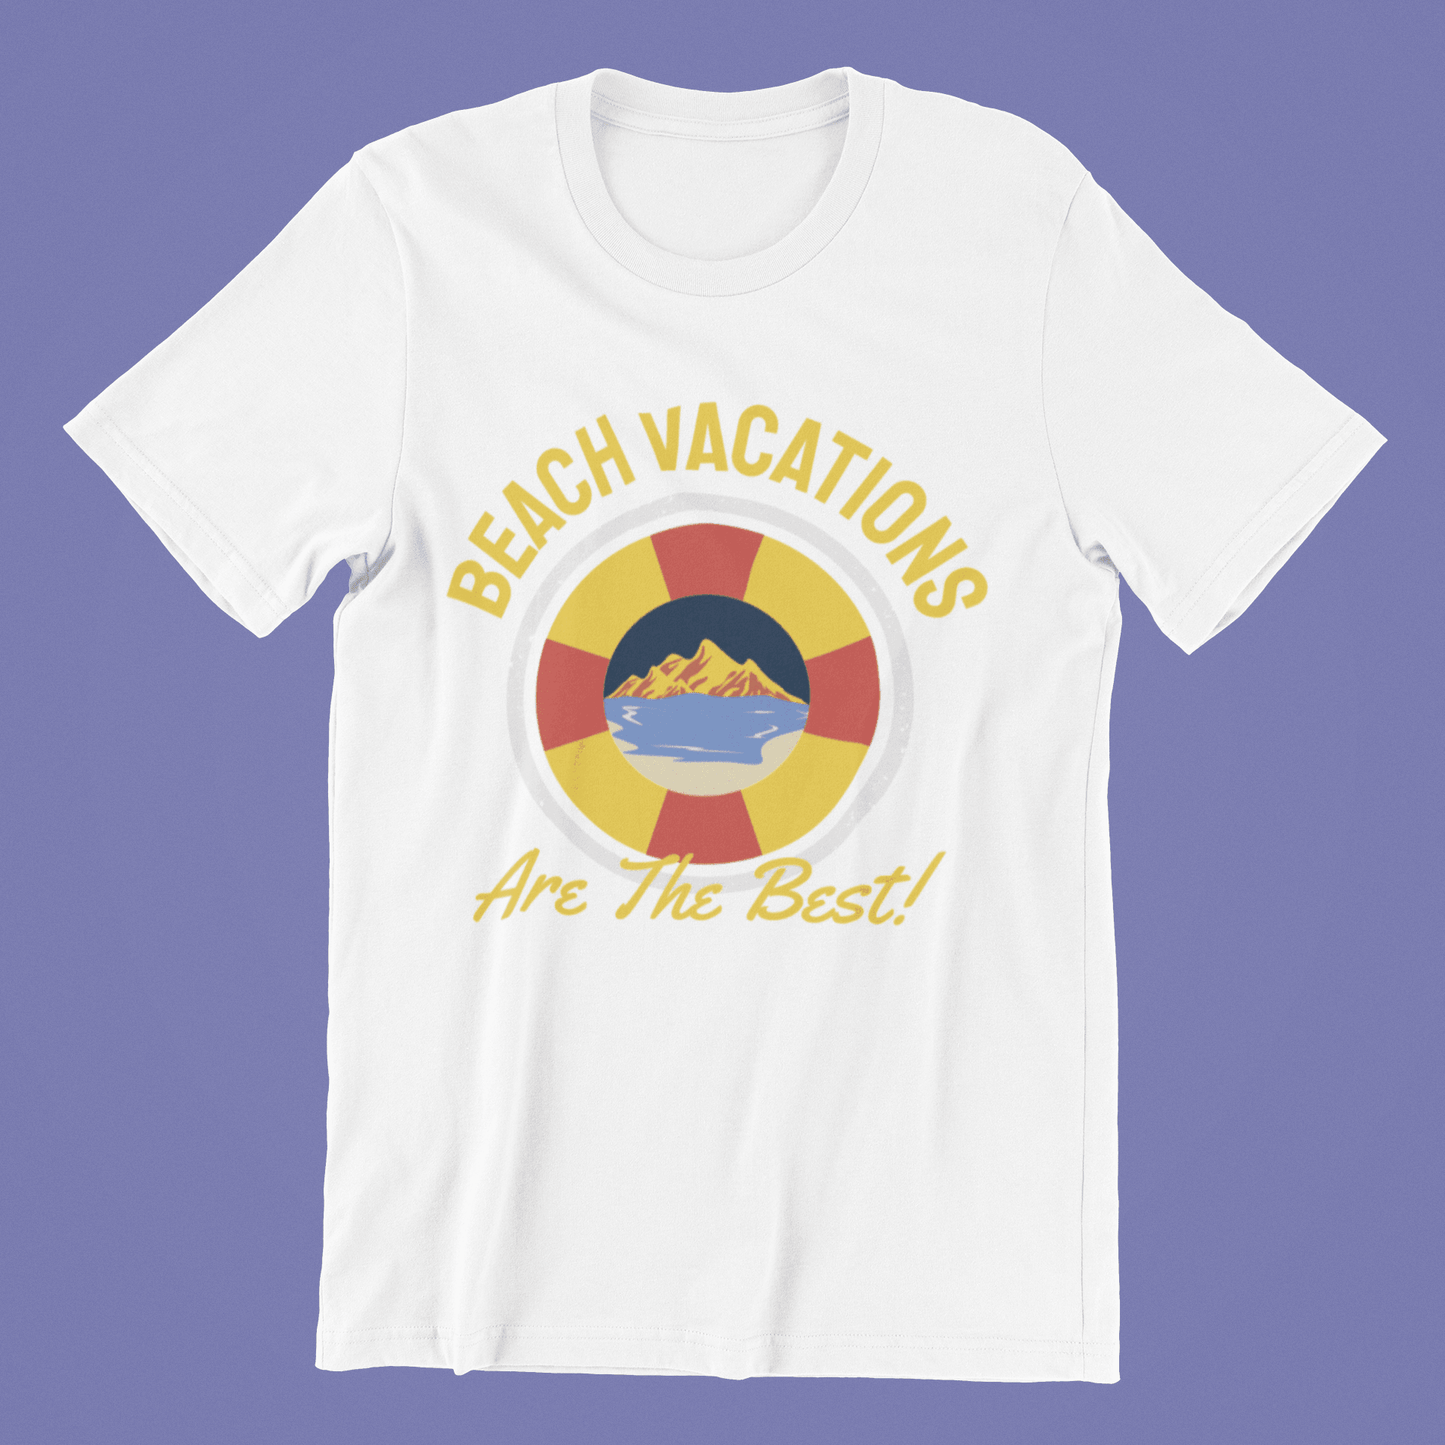 Beach Vacations Are The Best White Oversized T-Shirt For Men - ATOM